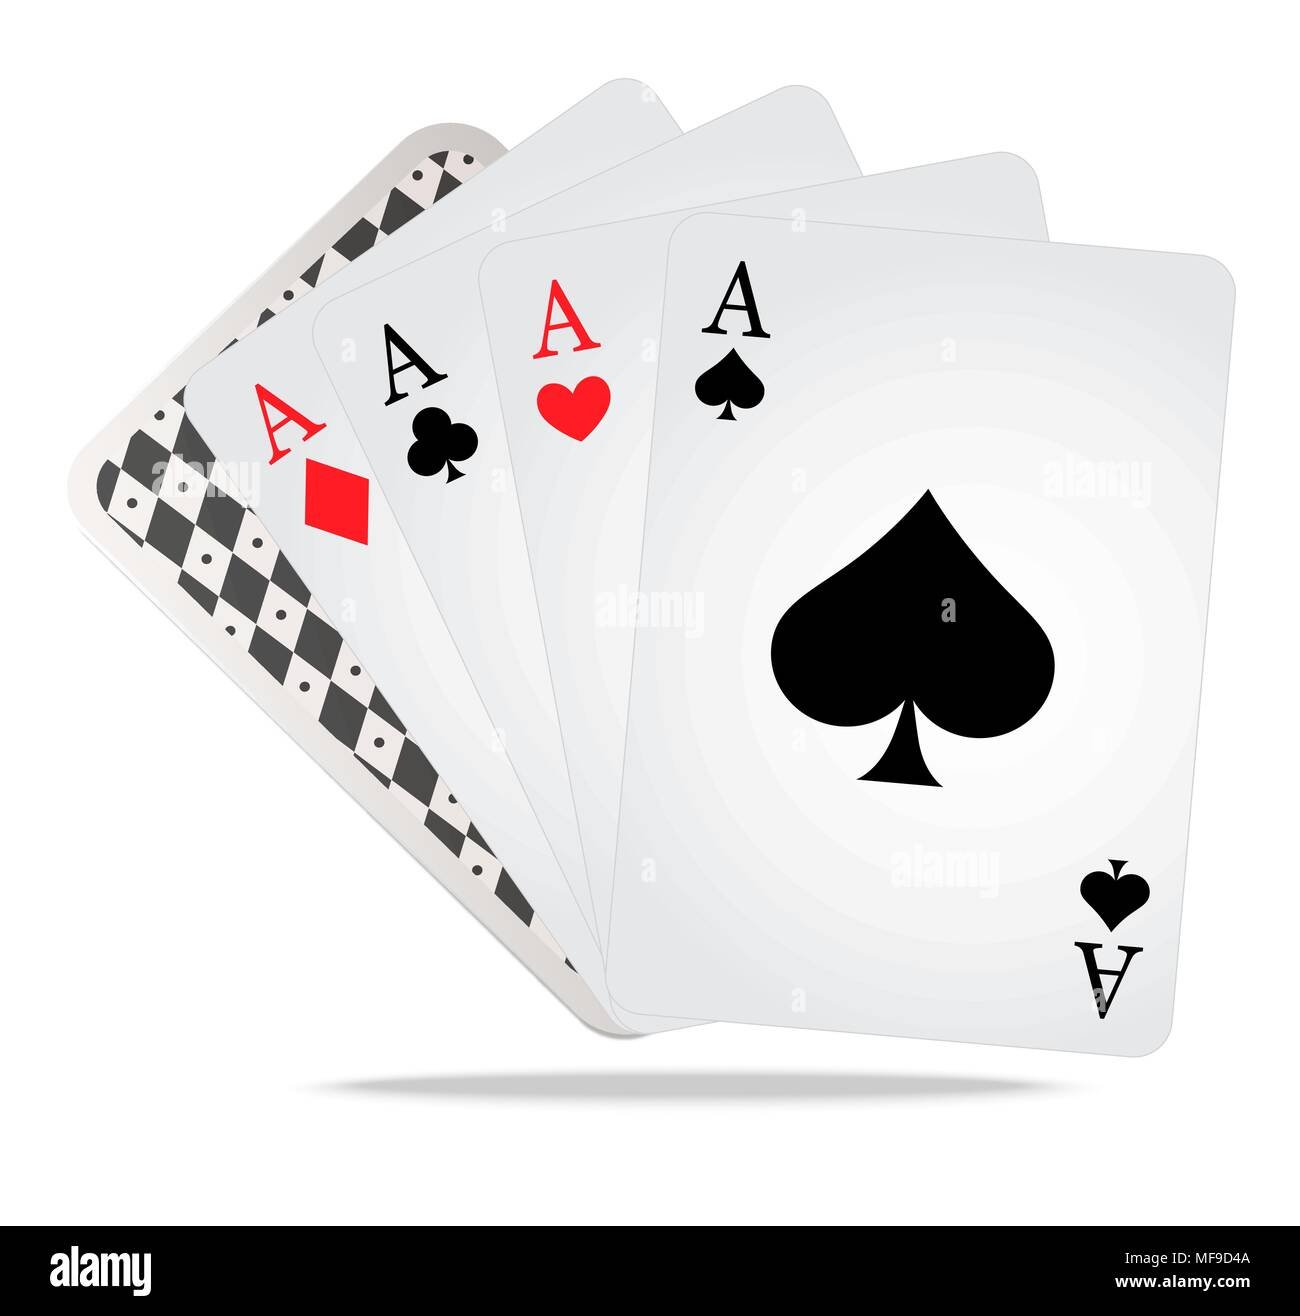 poker-playing-cards-with-casino-games-MF9D4A